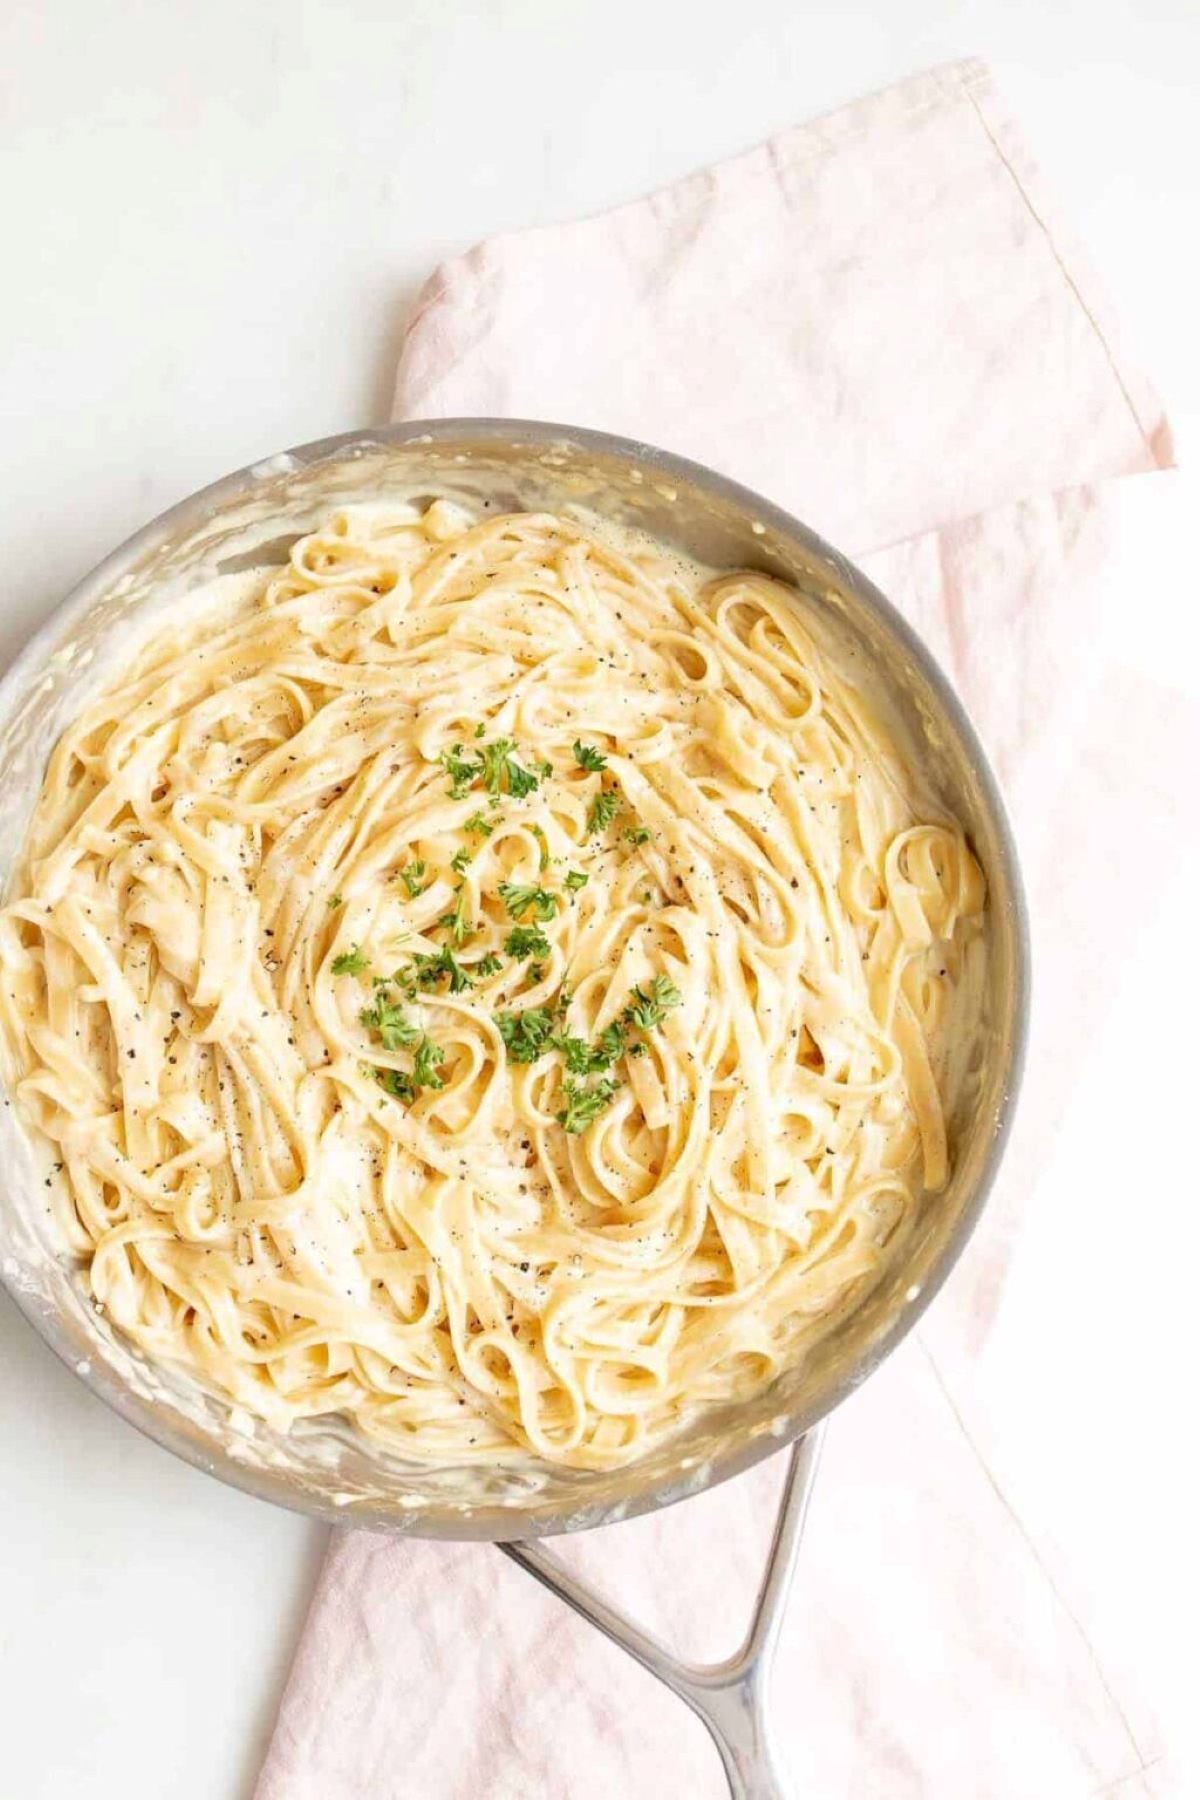 A stainless steel saute pan filled with fresh fettuccine alfredo